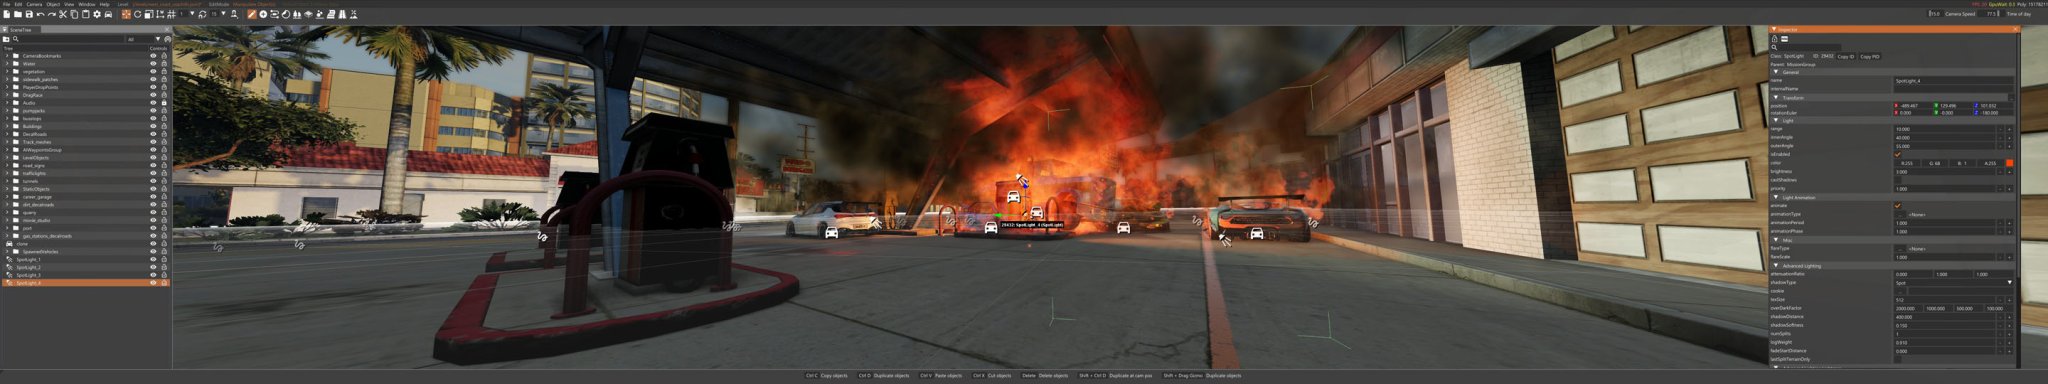 0b BeamNG Multiple VEHICLE Gas Station FIRE EXPLOSION World Editor copy.jpg